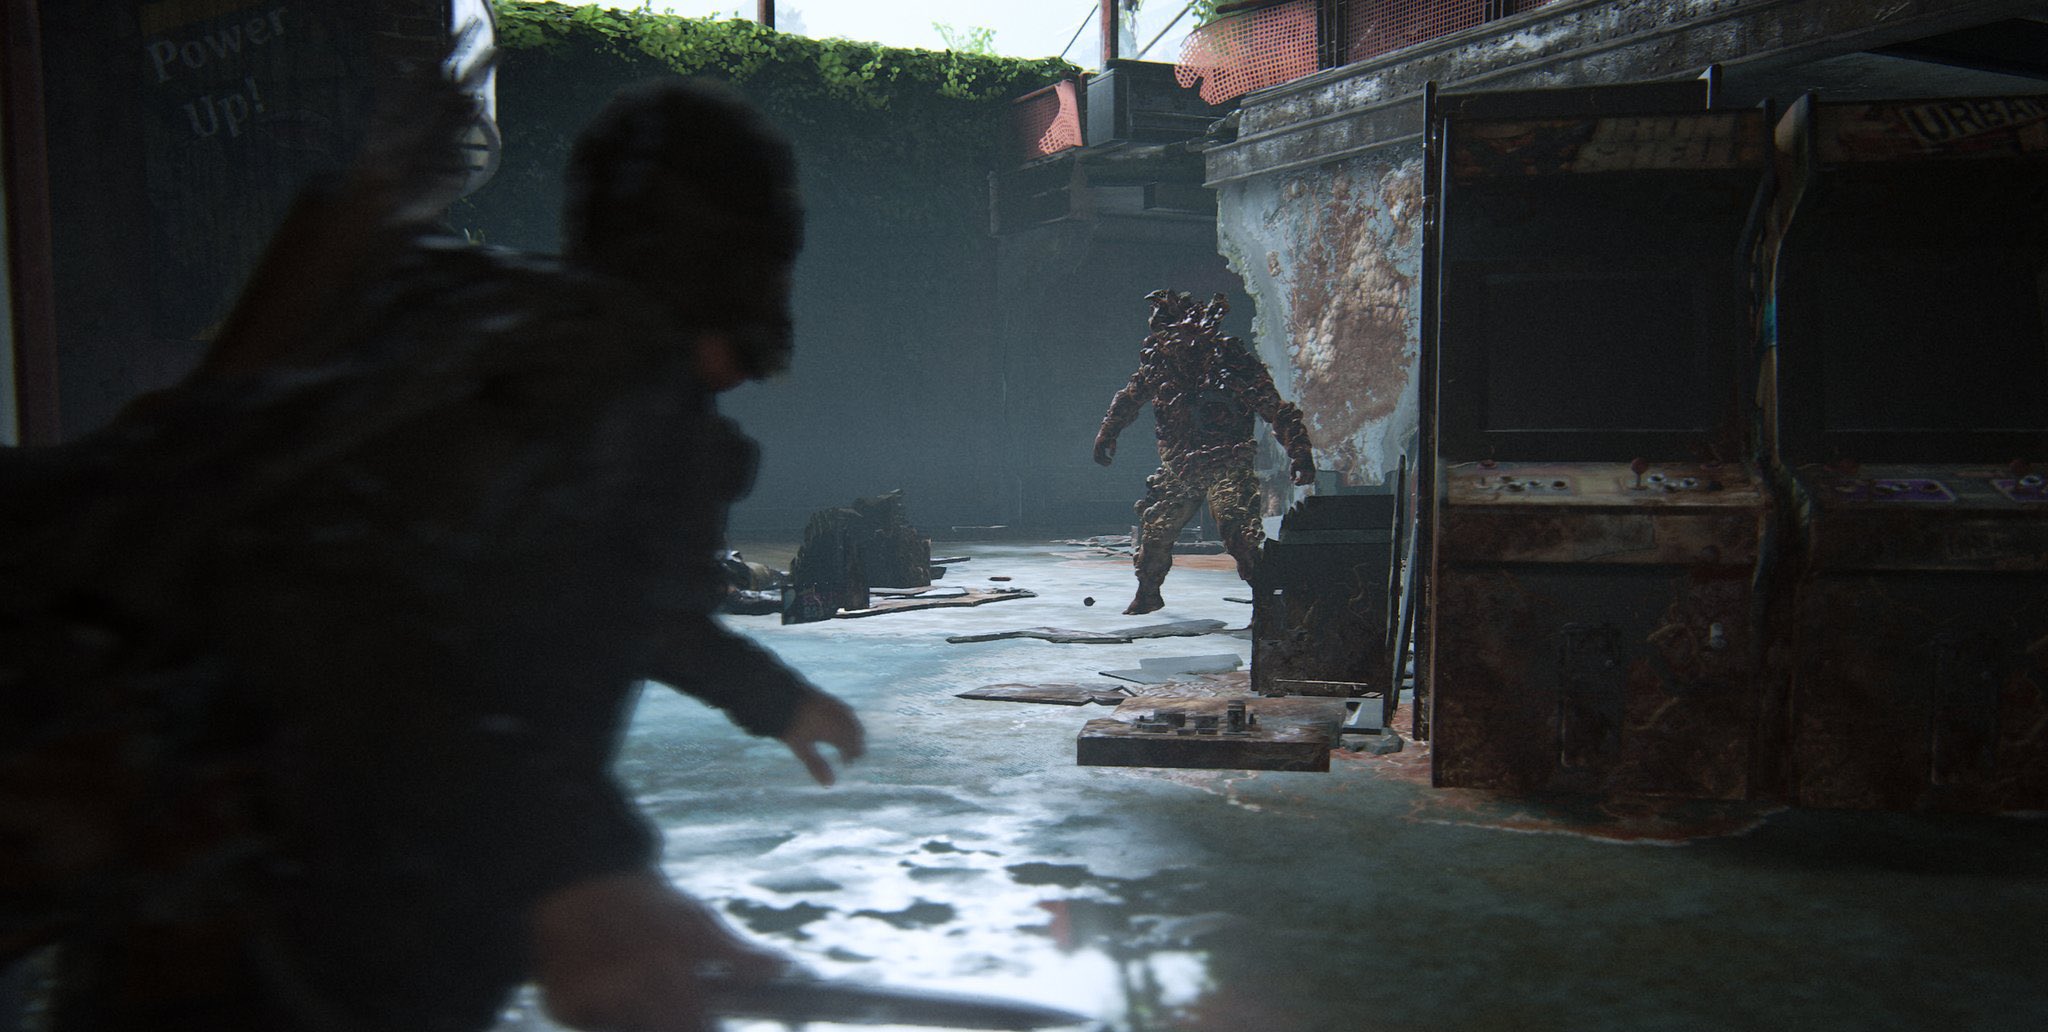 The Last of Us Part II Remastered llegará a PS5 11